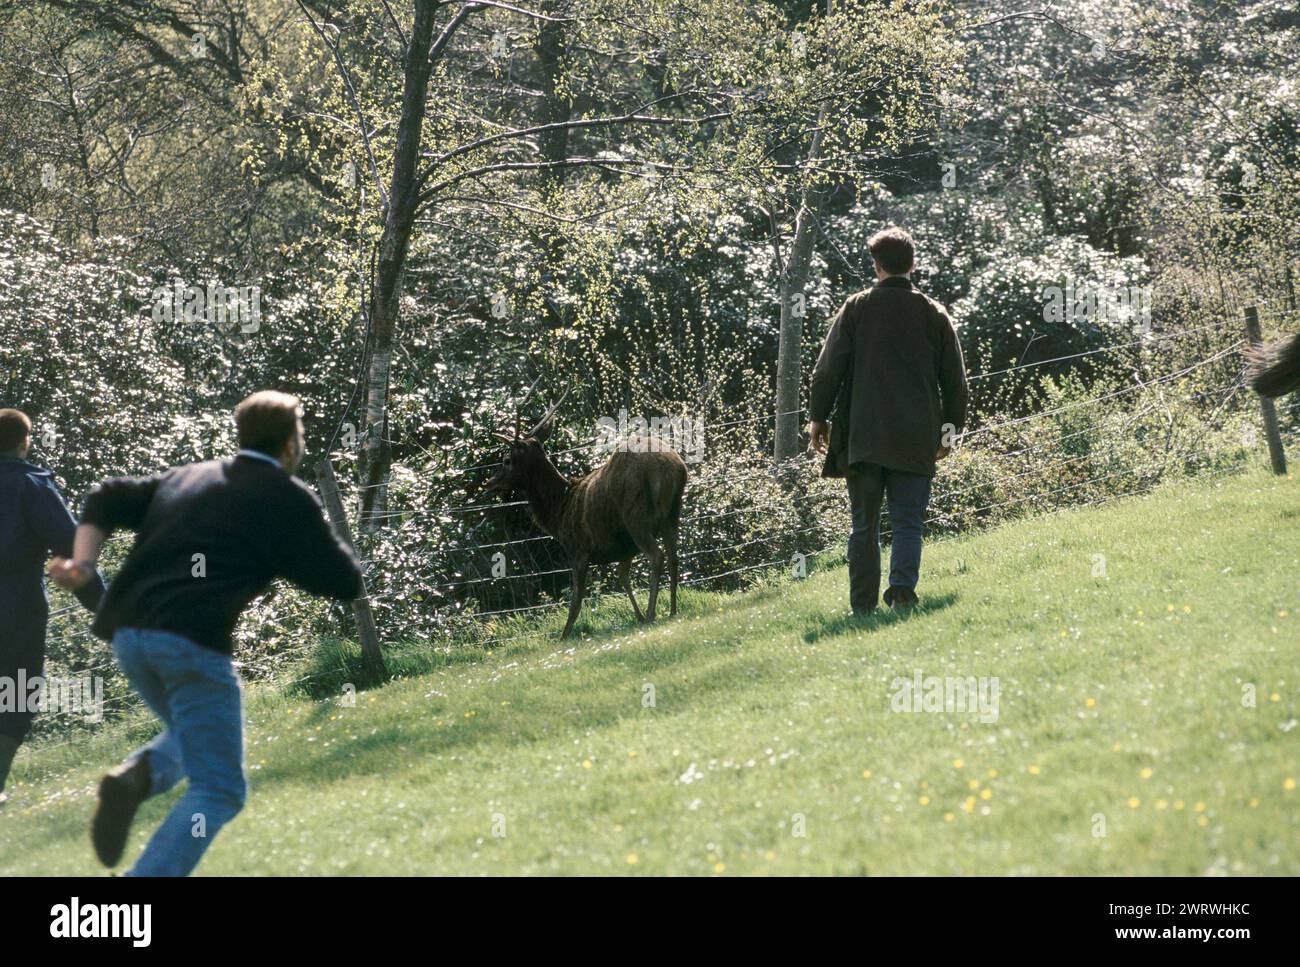 Quantock Staghounds 1990s Uk. Quantock Hills Somerset. The stag is brought to bay by hounds and then shot, culled by a shooter. 1997 Foot followers run to catch up with the deer. and 'hold' with out stretched arms  the stag deer at bay. HOMER SYKES Stock Photo